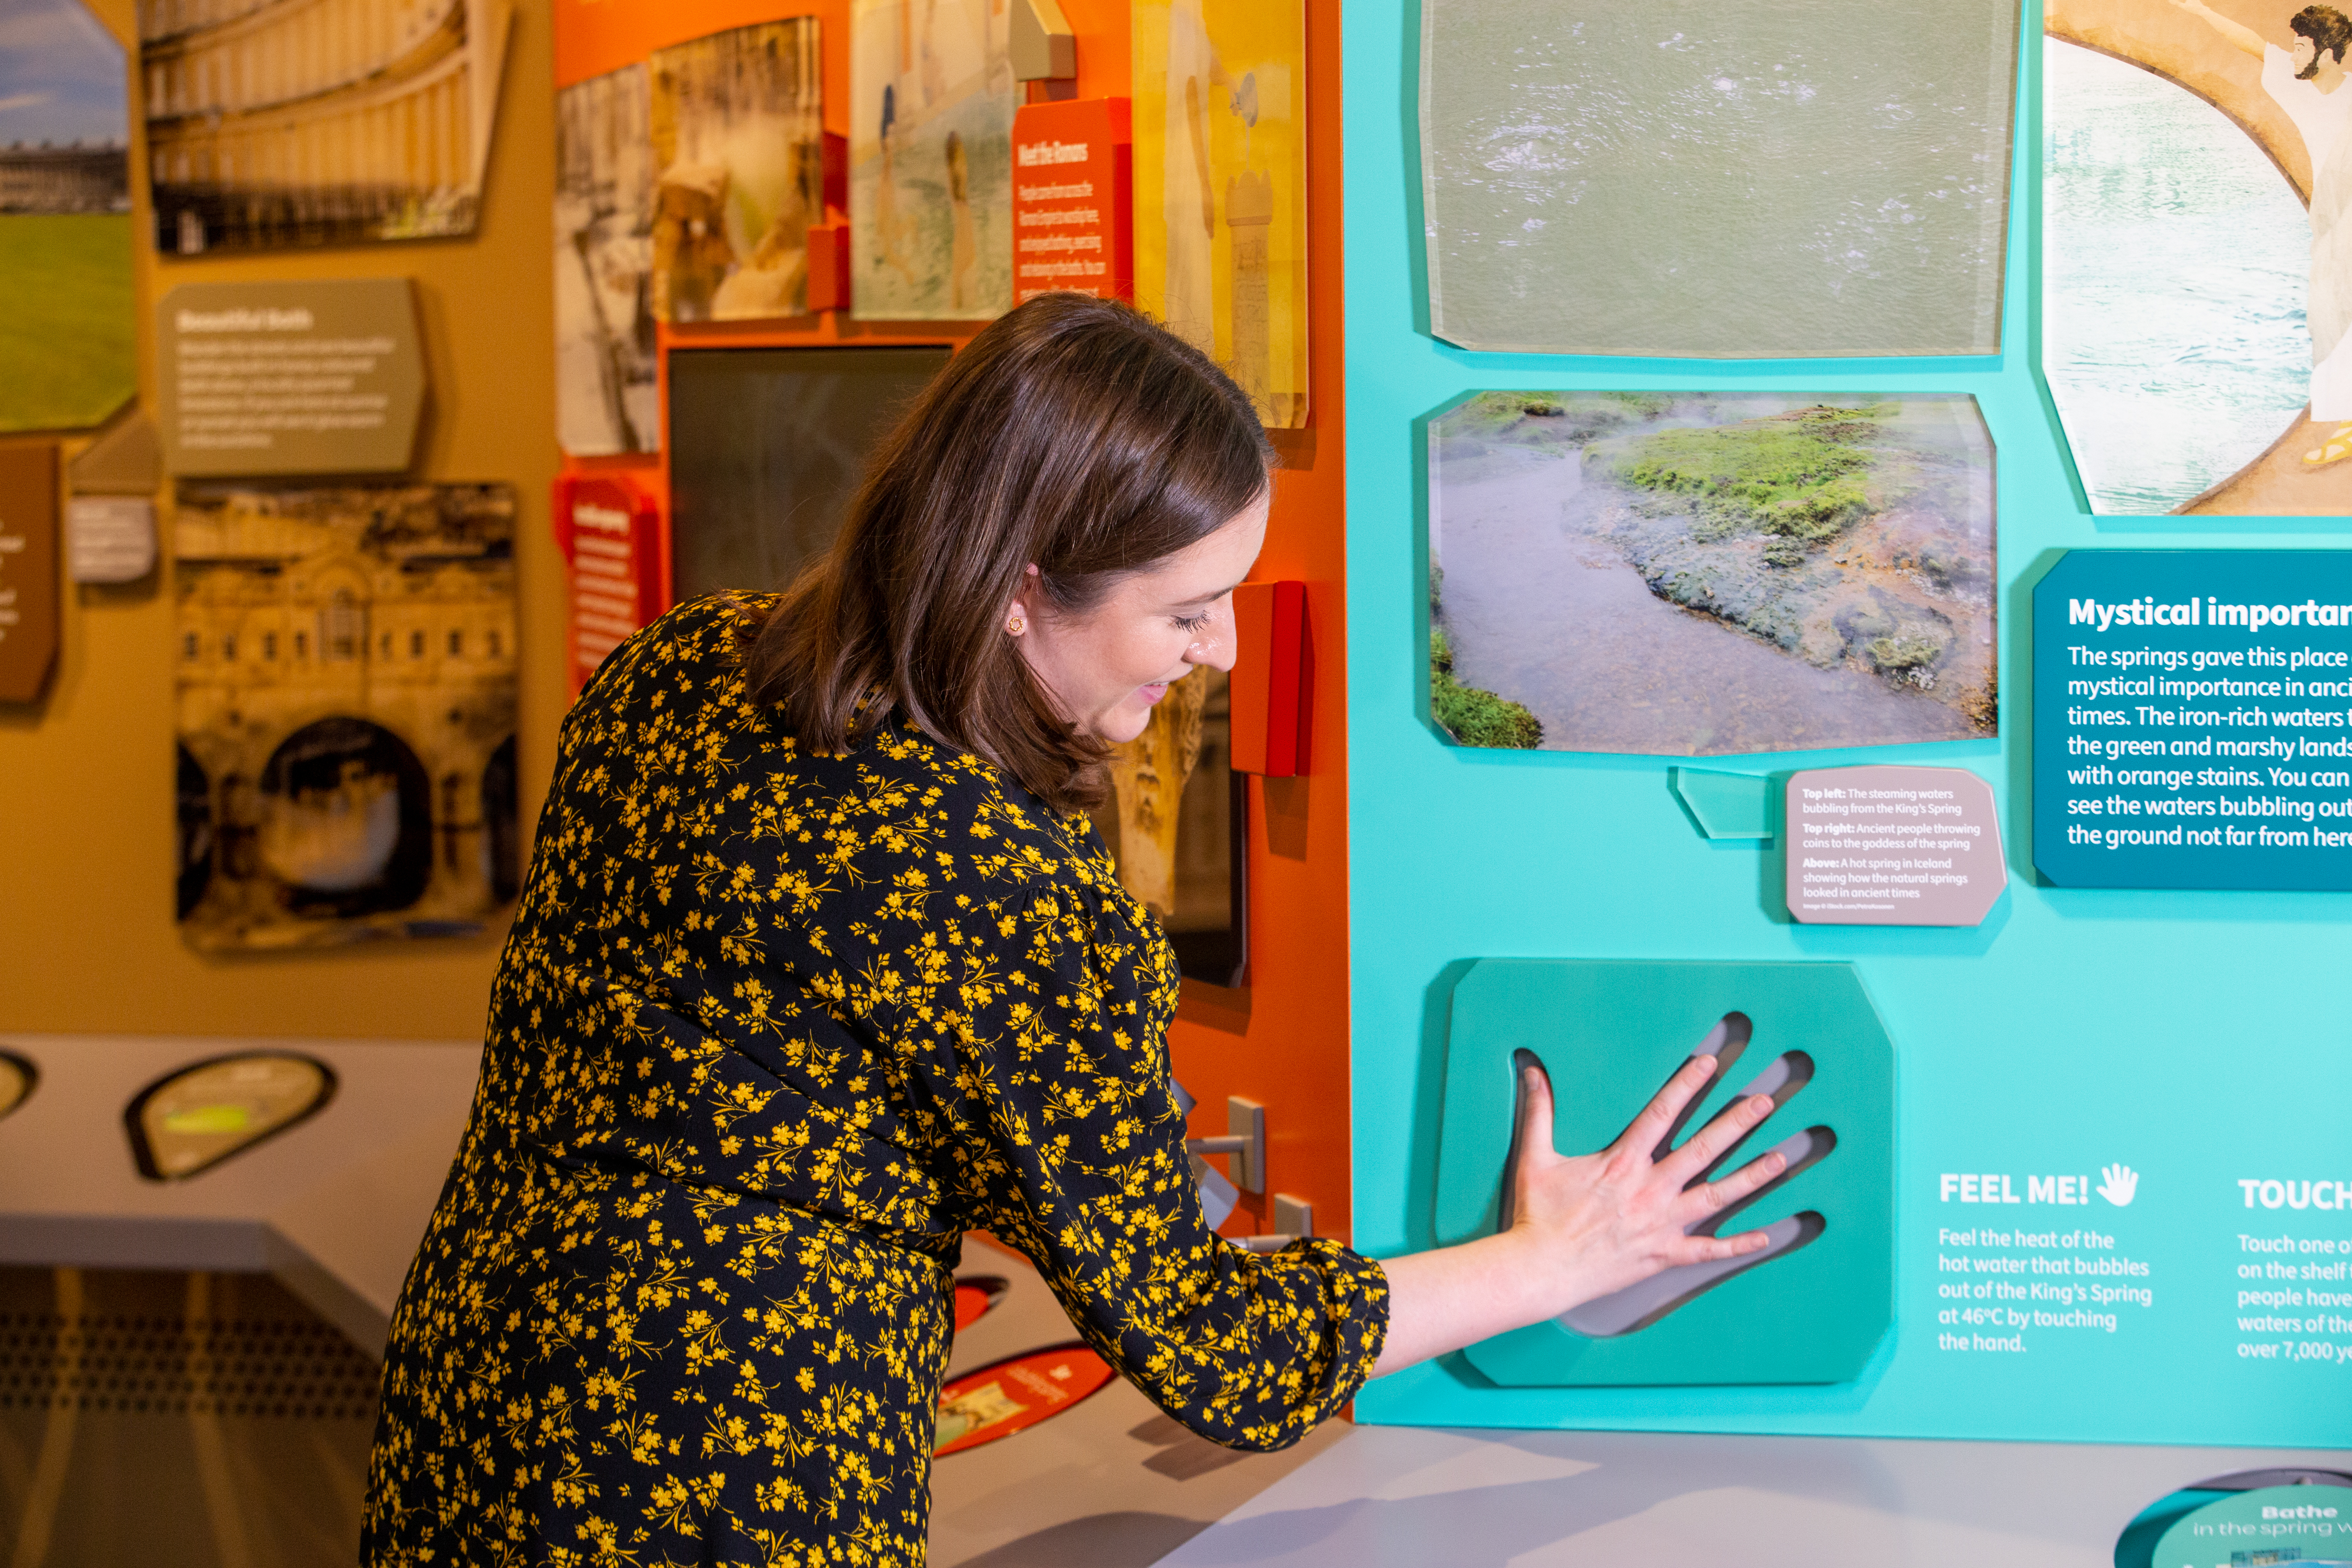 Image: A visitor trying out an interactive display